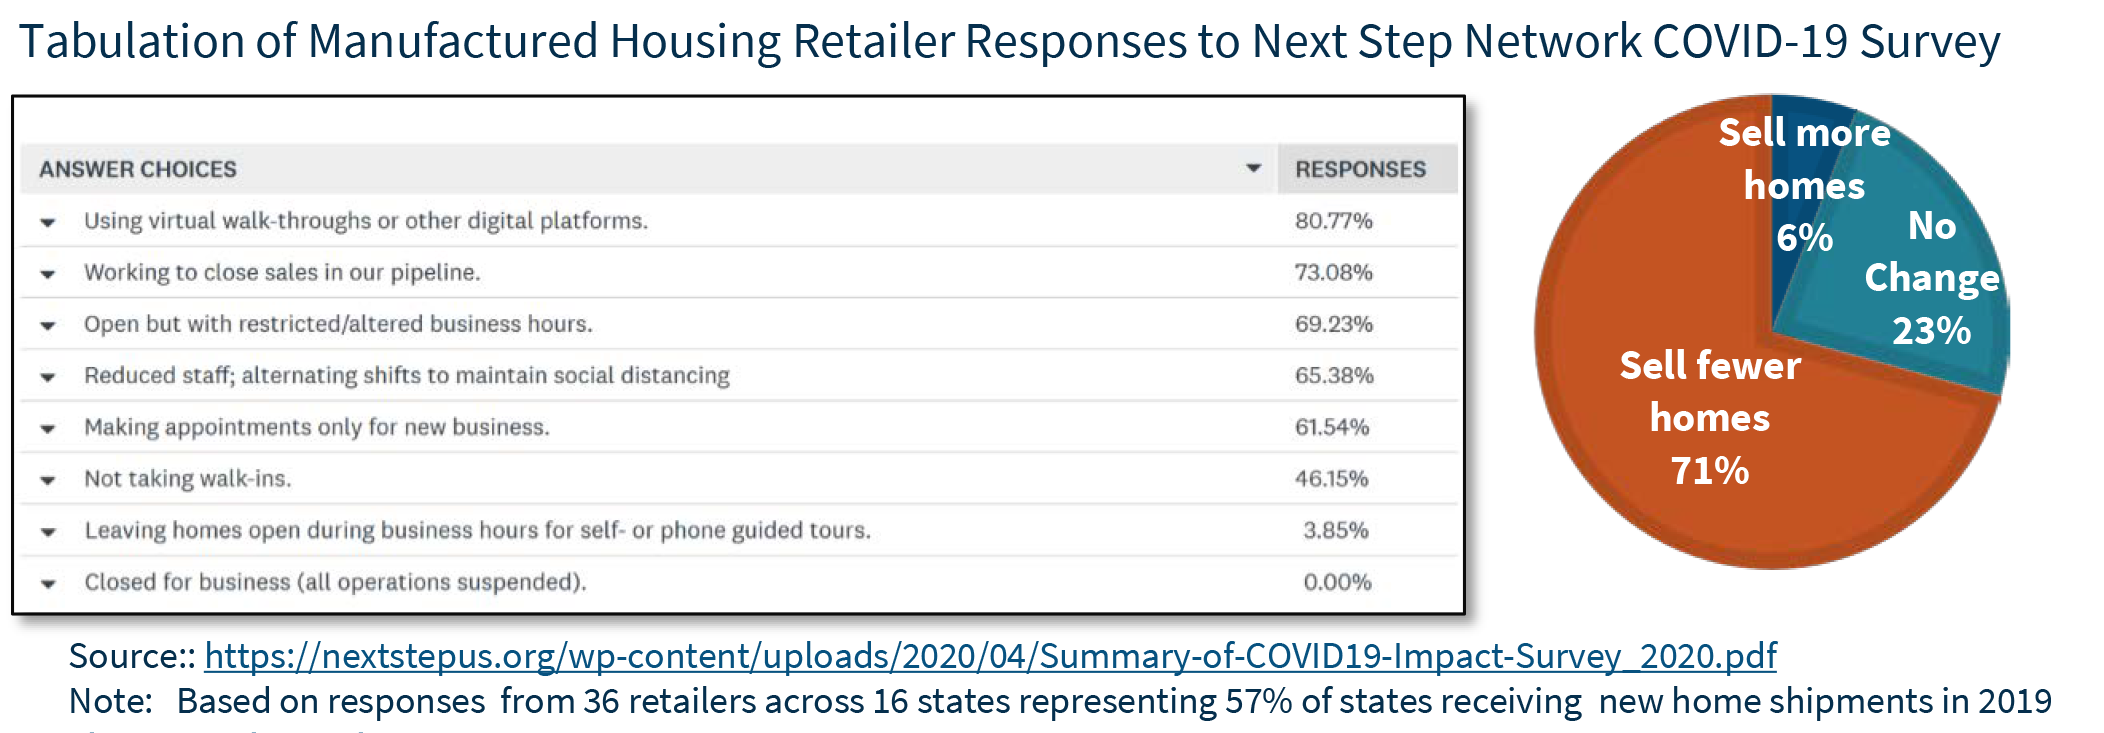 Tabulation of Manufactured Housing Retailer Responses to Next Step Network COVID-19 Survey